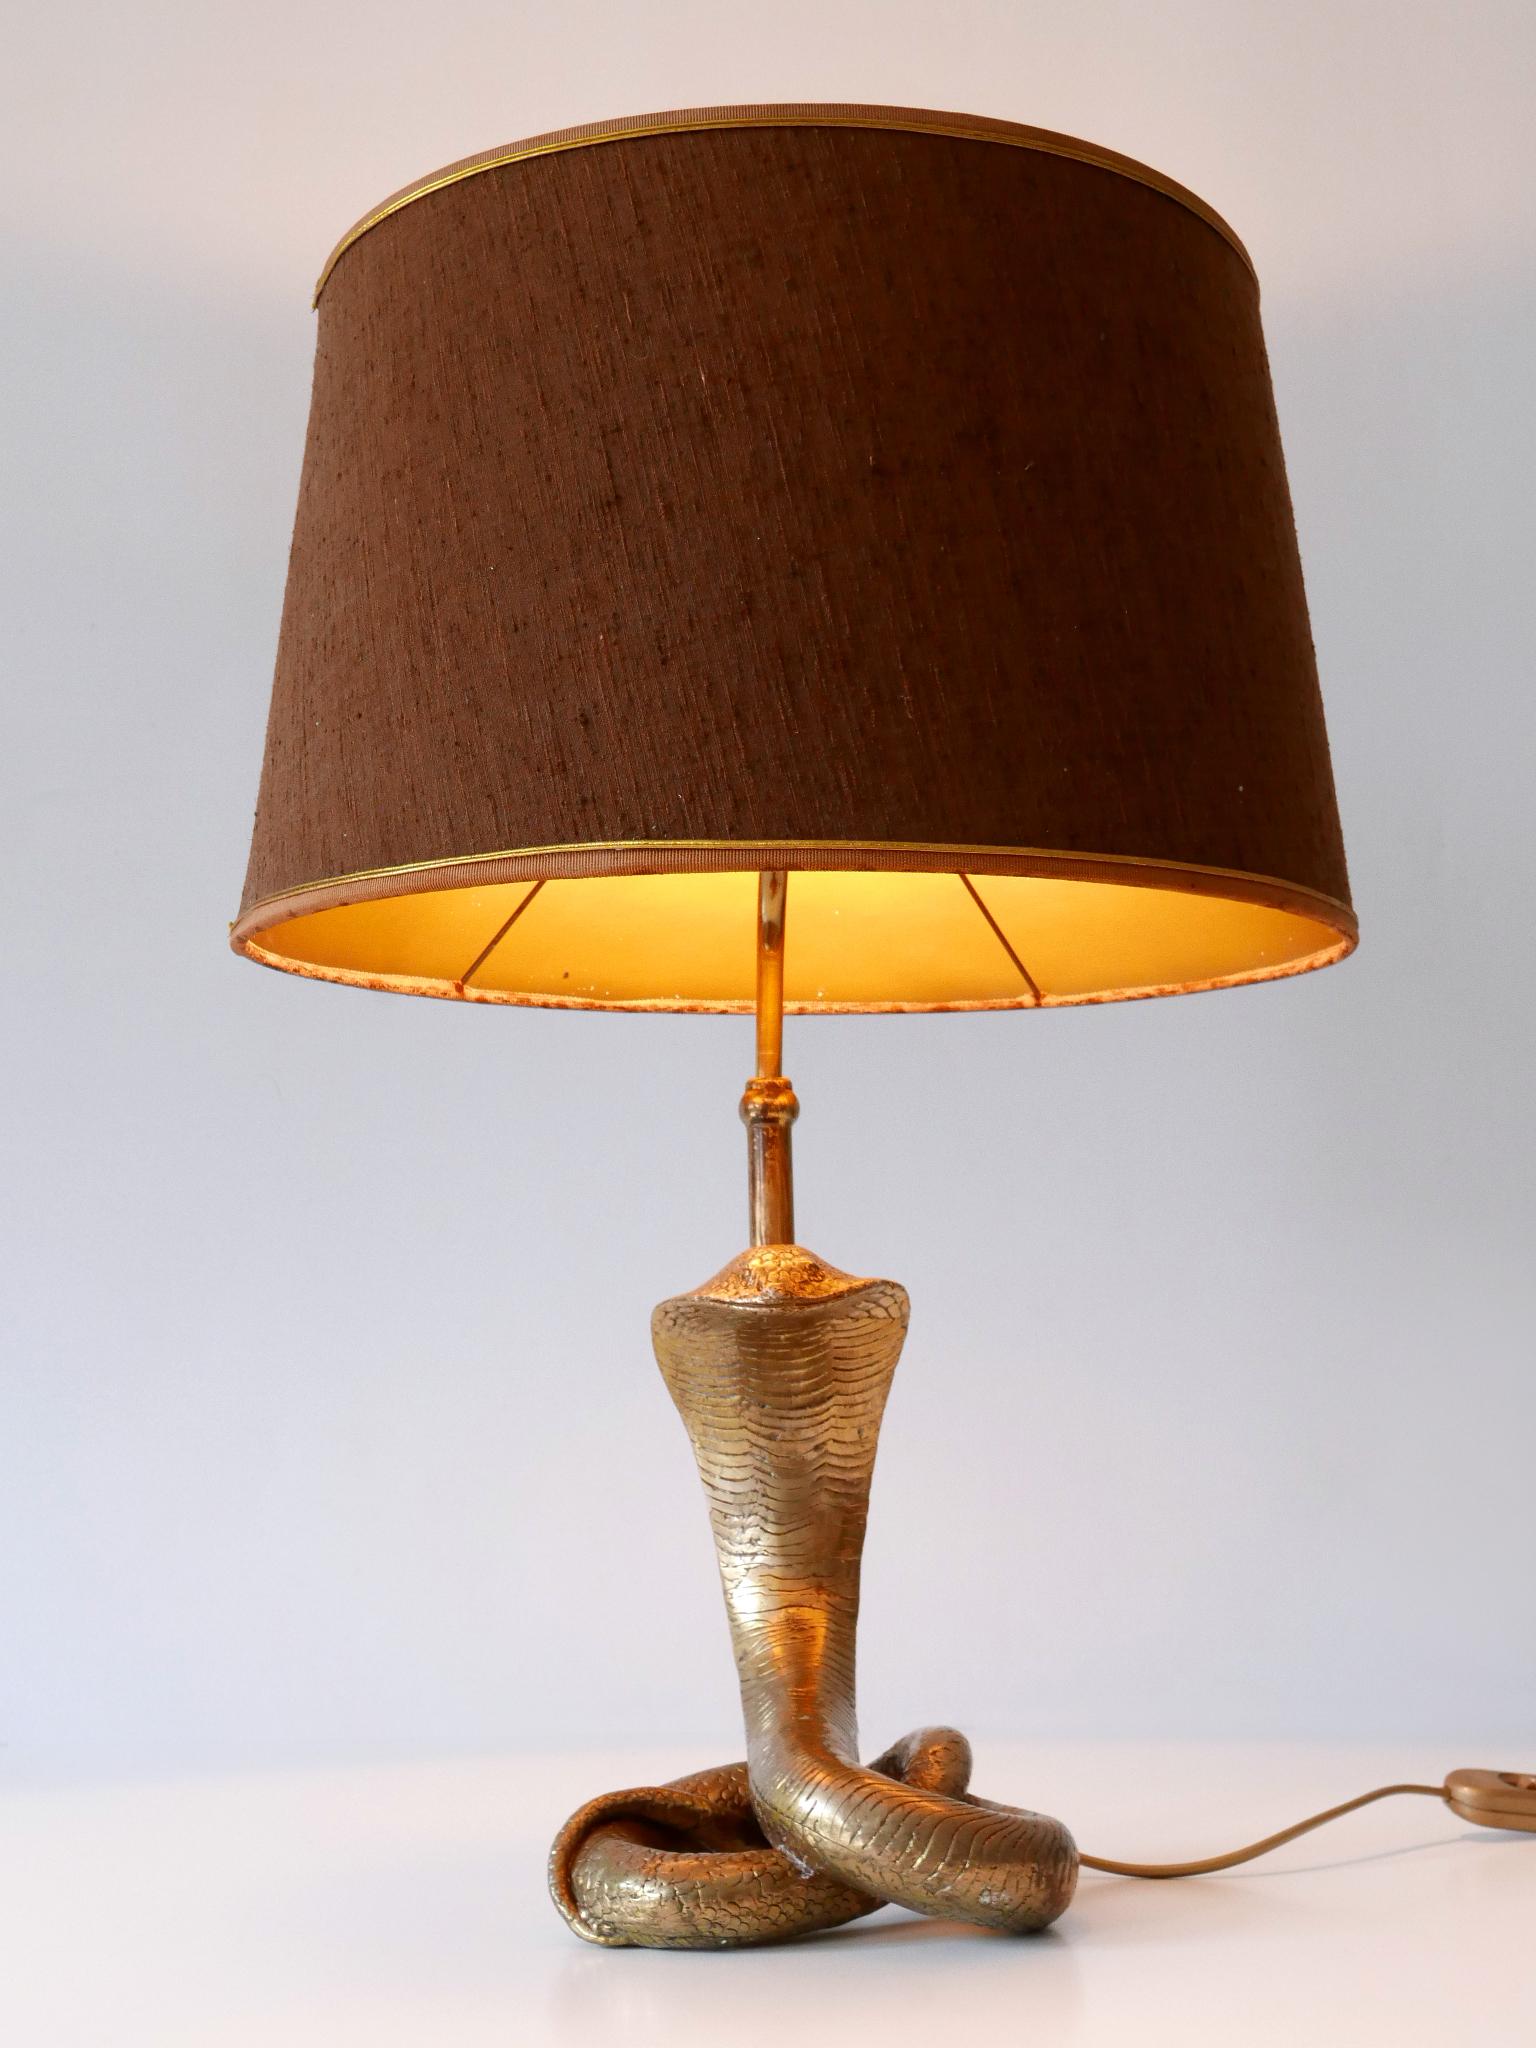 Extraordinary and amazing Mid-Century Modern brass 'cobra' table lamp. Designed & manufactured probably by Maison Jansen, France, 1970s.

Executed in massive brass, tube and silk/fabric shade, the lamp comes with 1 x E27 / E26 Edison screw fit bulb